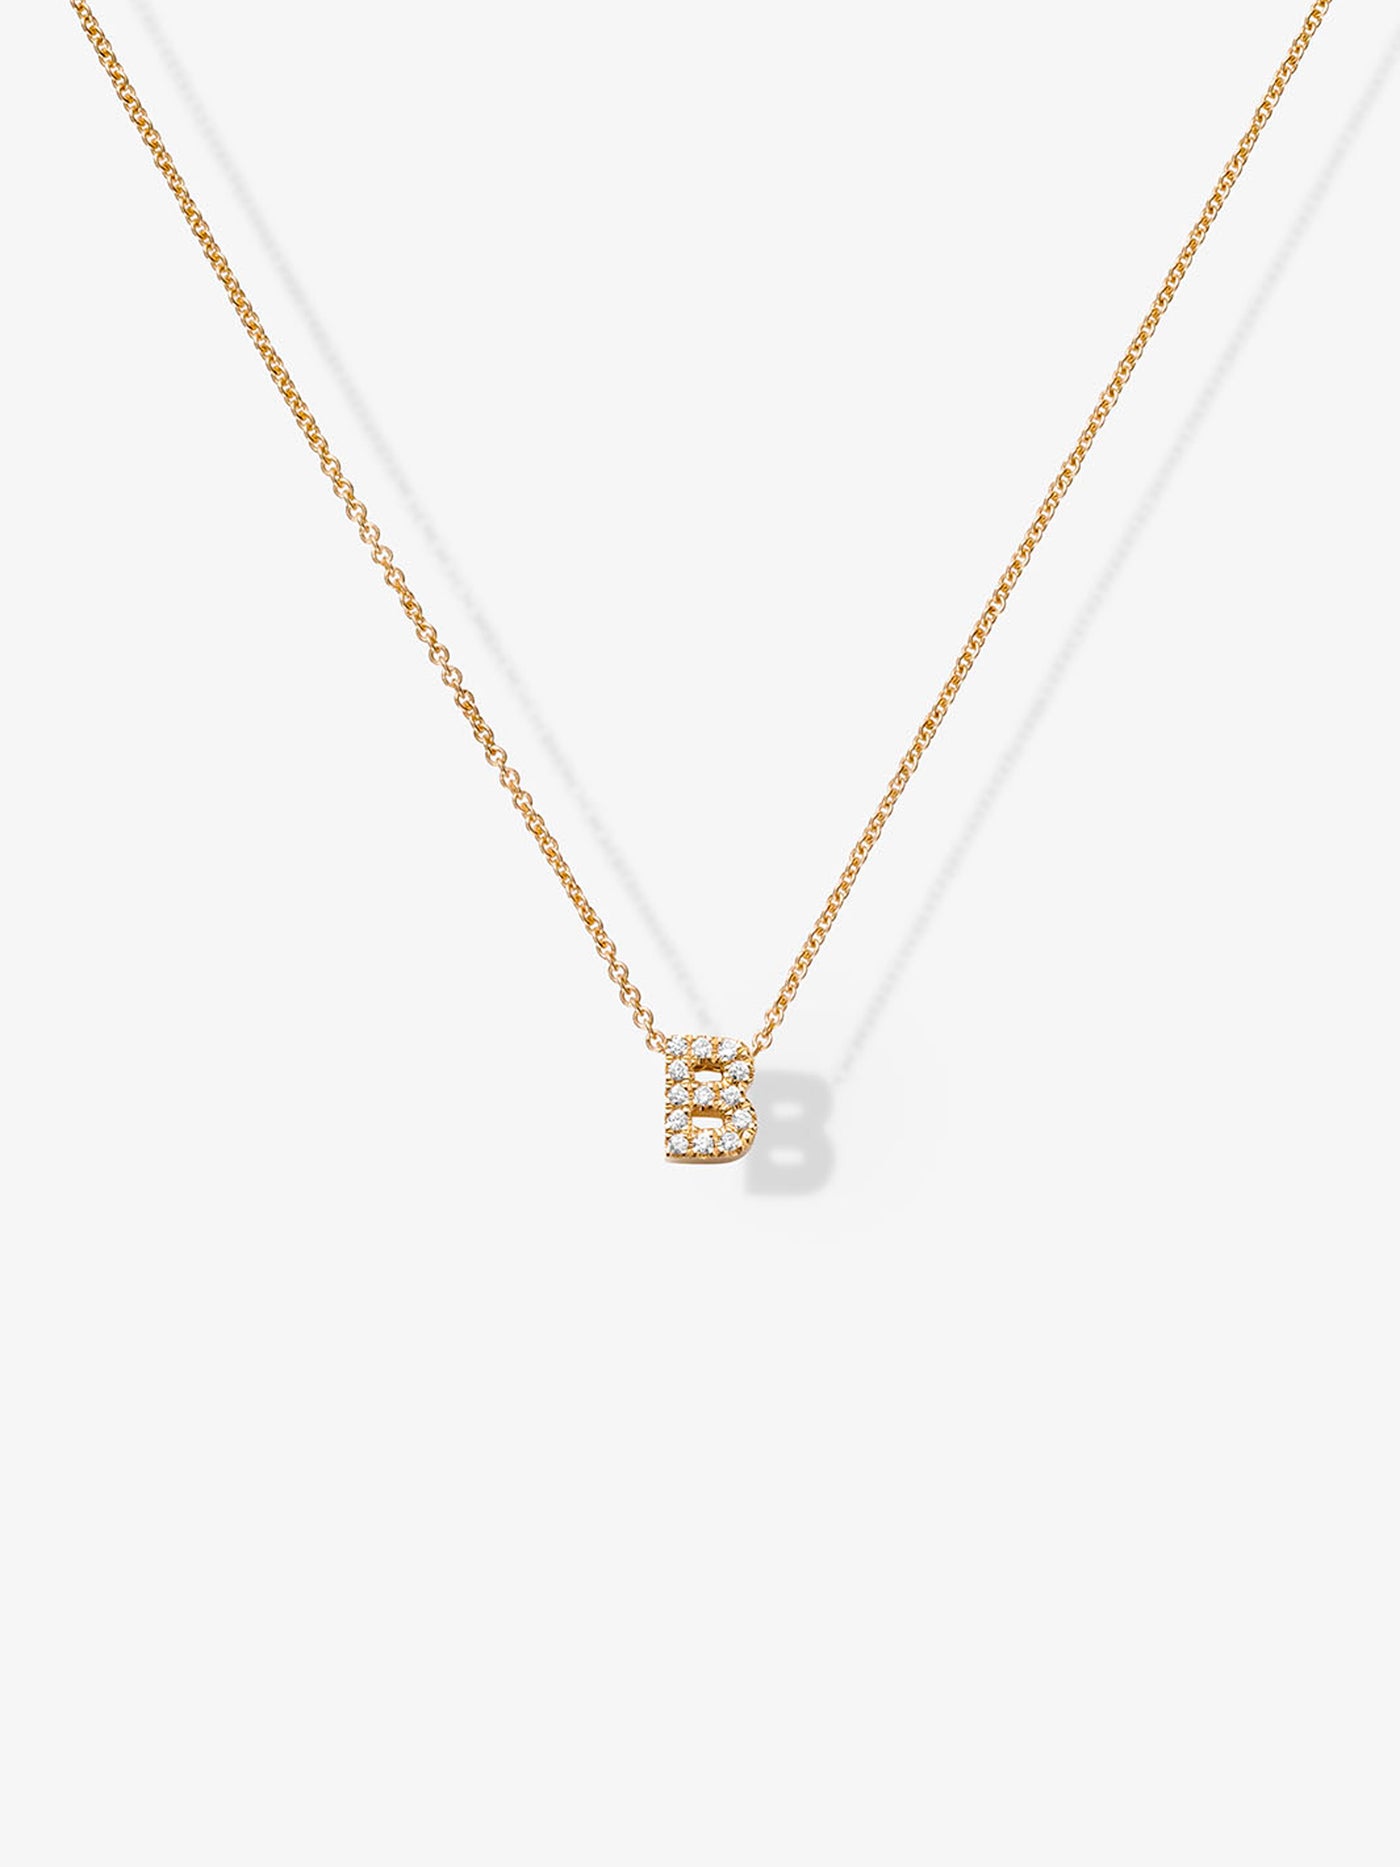 Letter B Necklace in Diamonds and 18k Gold